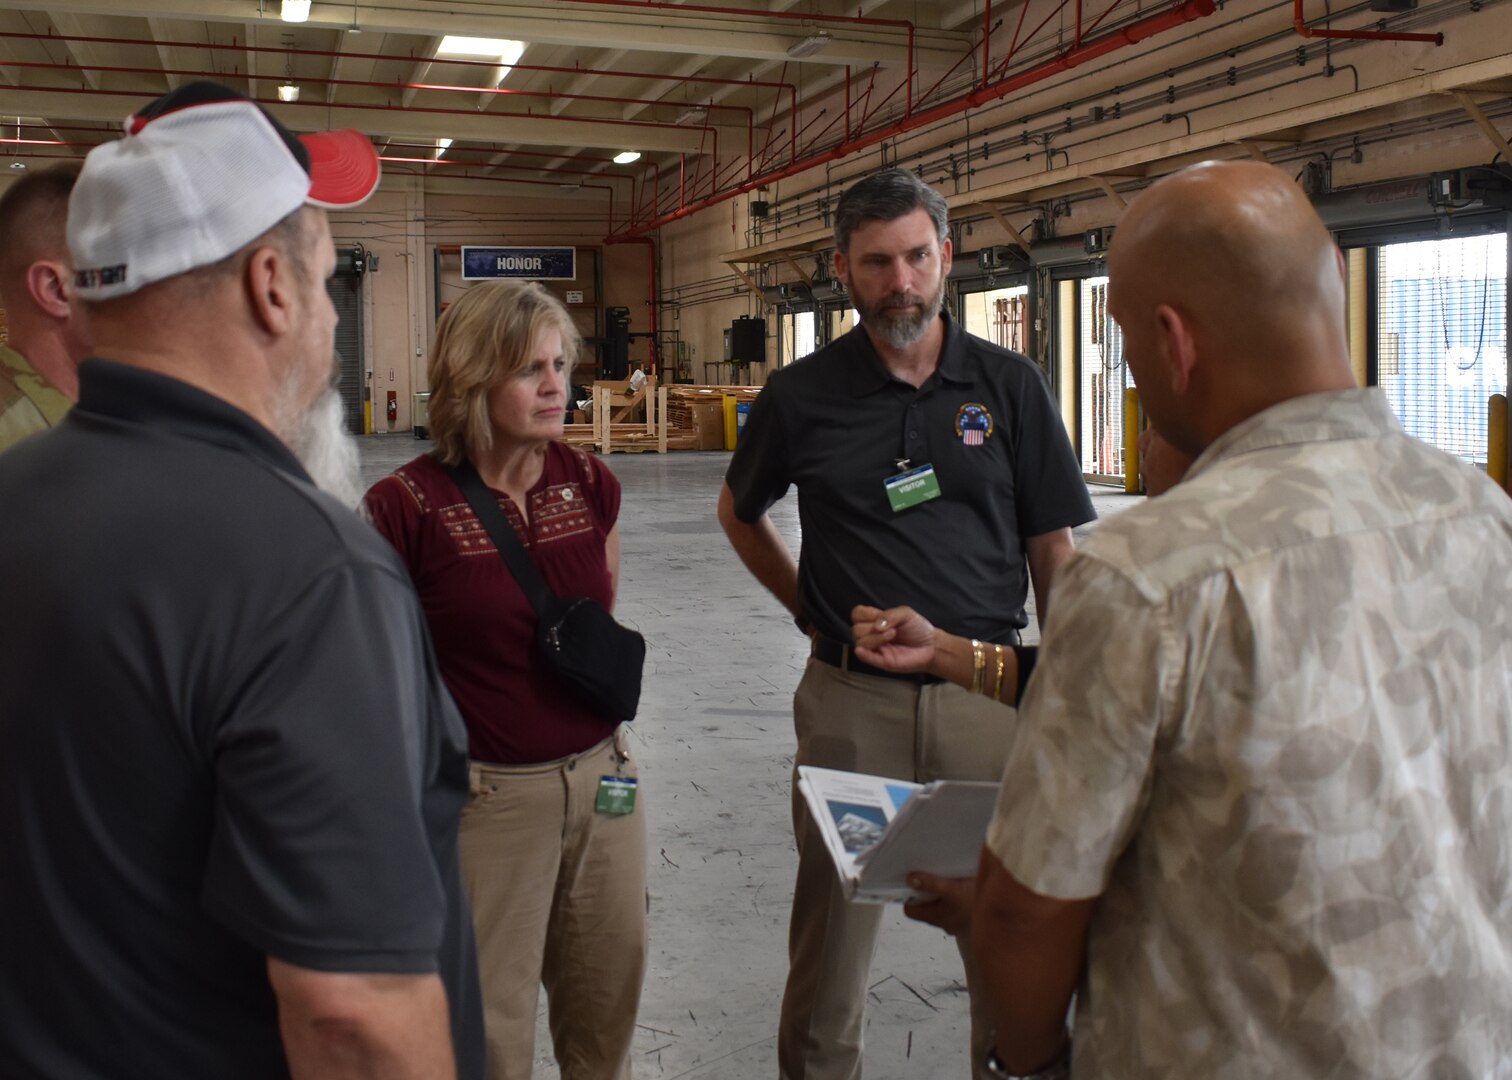 Three men and a woman stand in a warehouse talking.